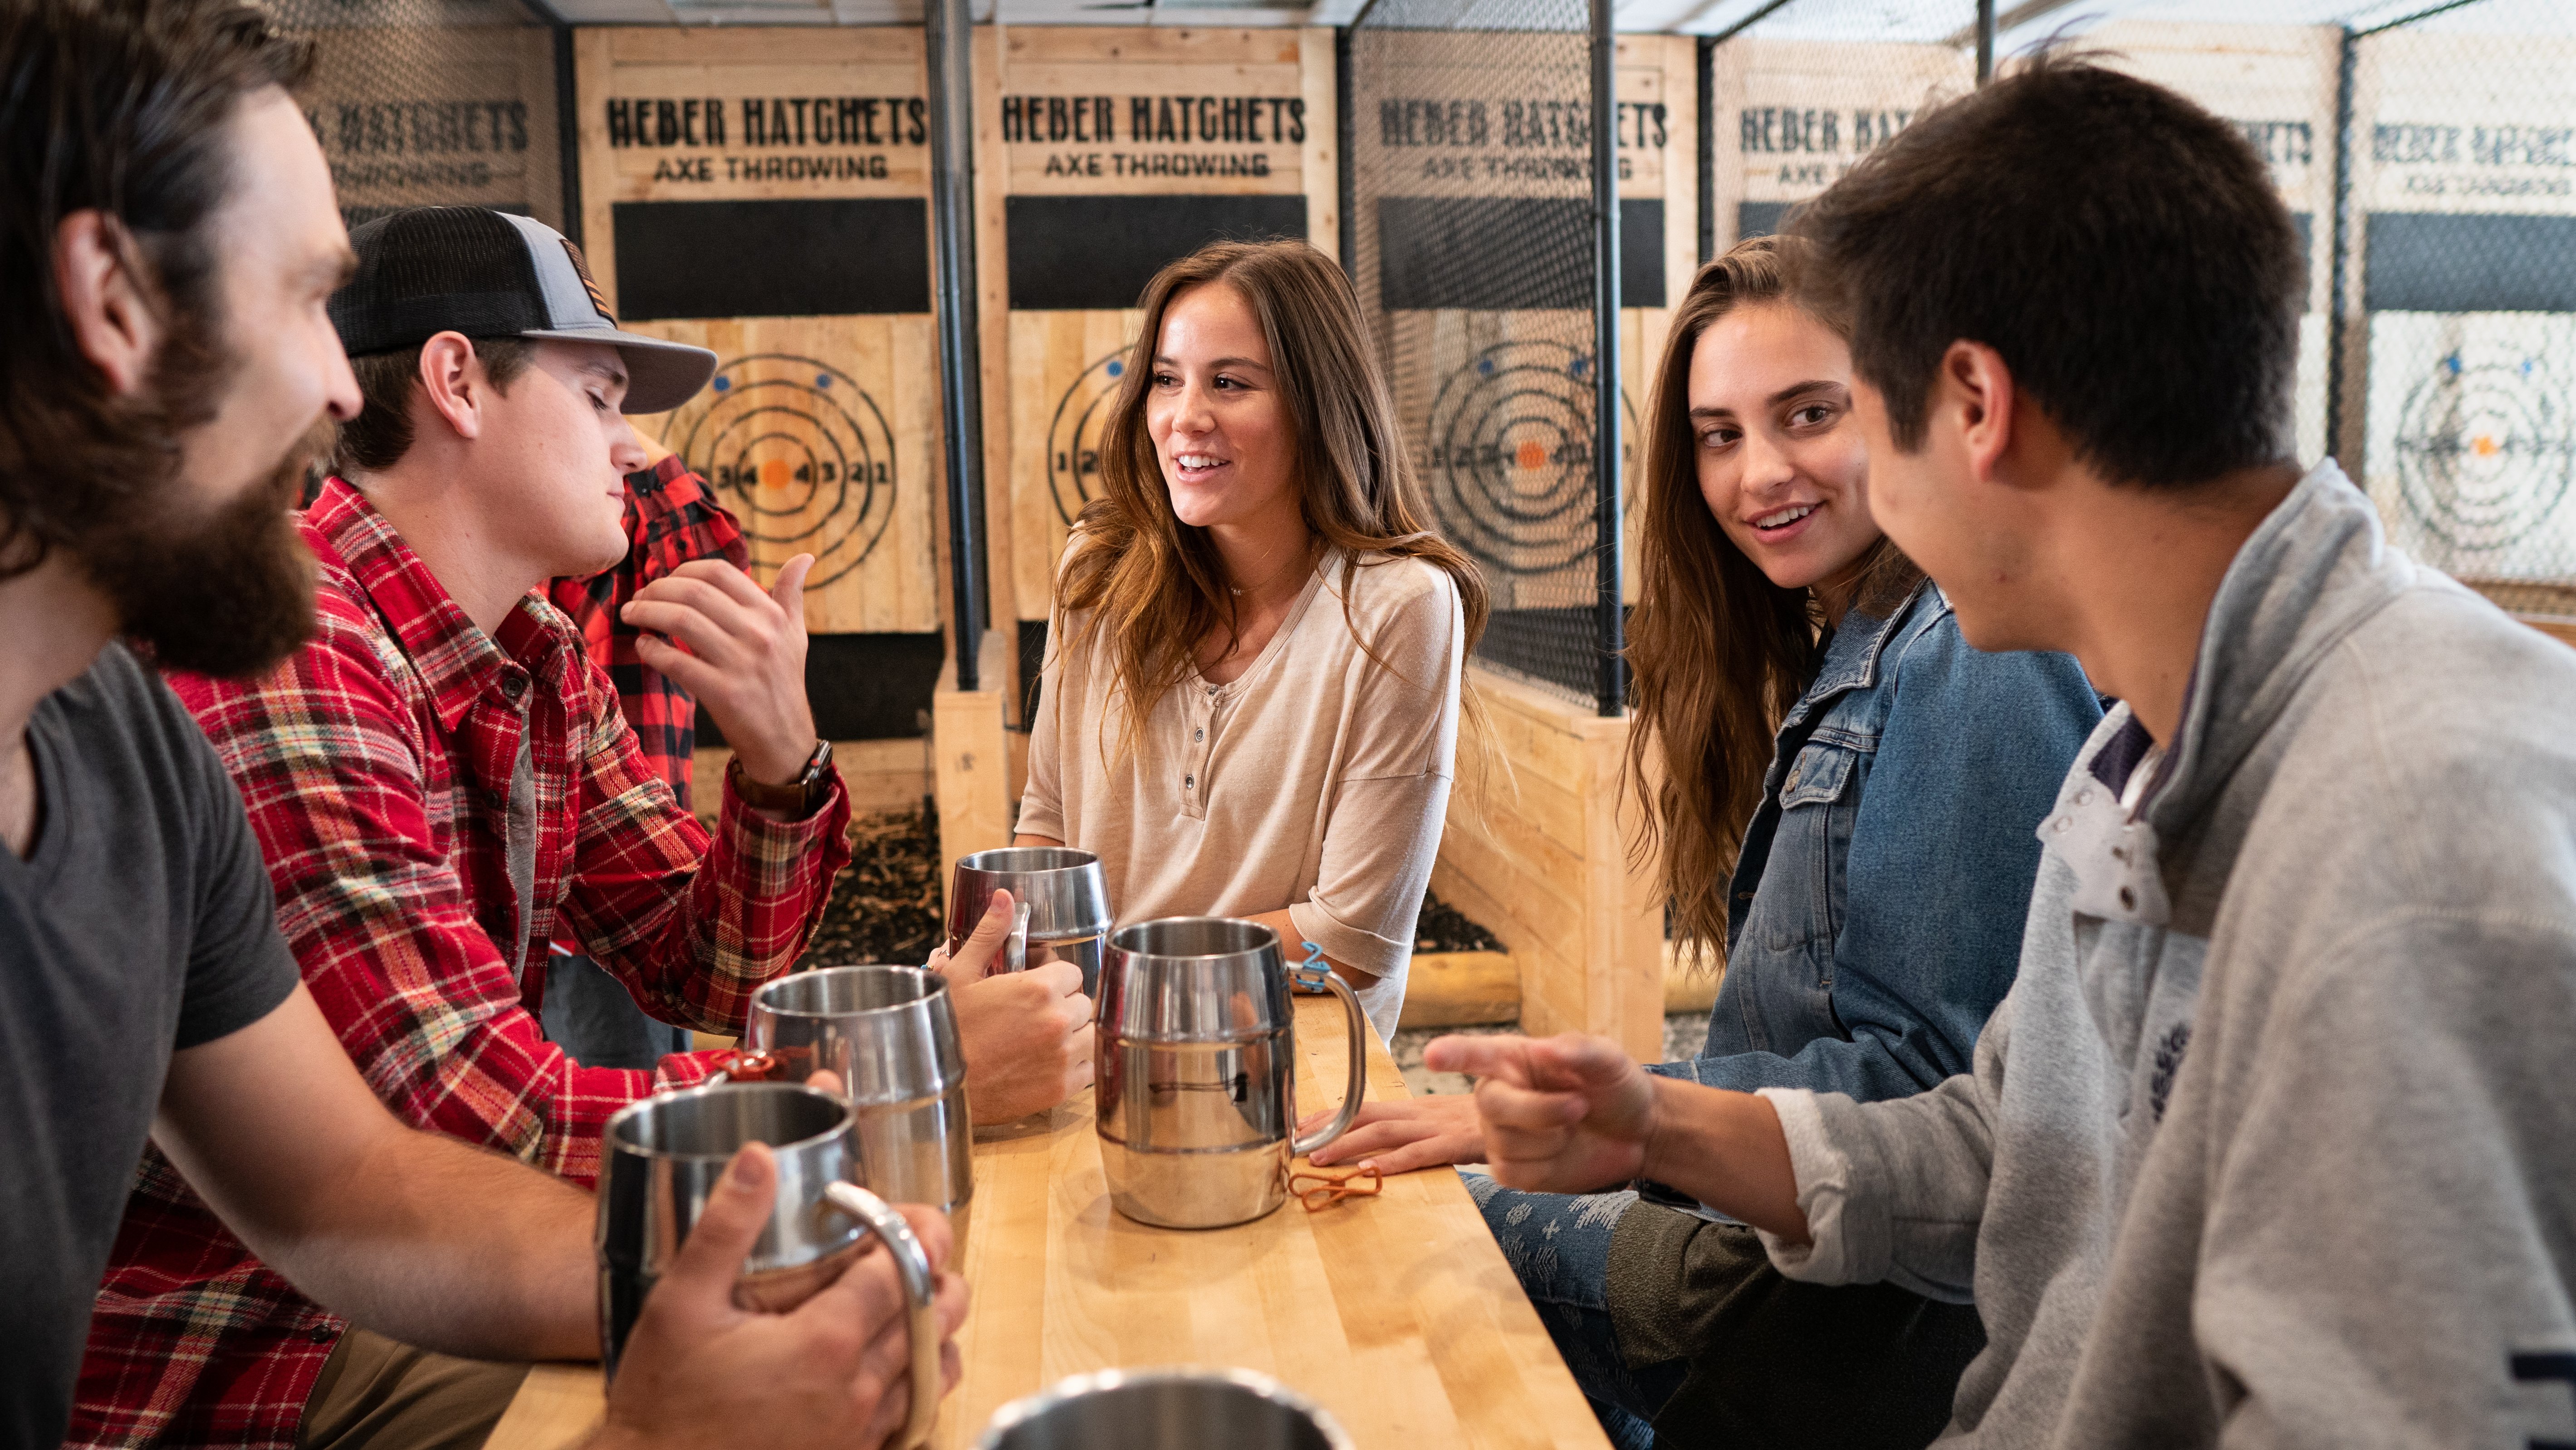 Couples on a group date talk together at Heber Hatchets in Provo